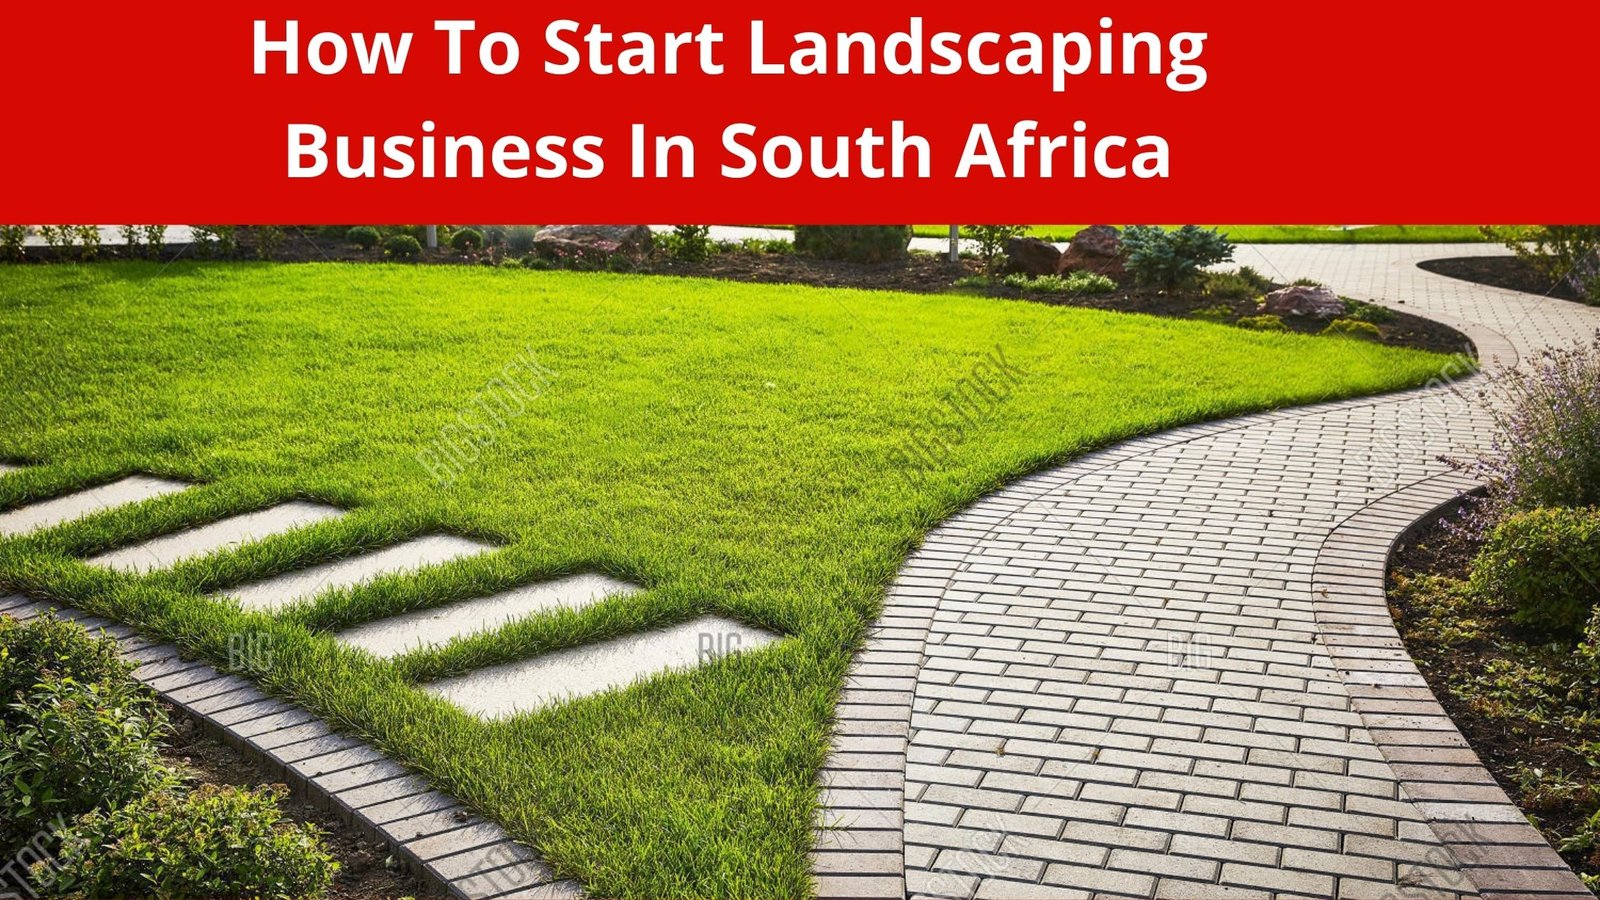 A Landscaping Business In South Africa, How To Start A Landscaping Company